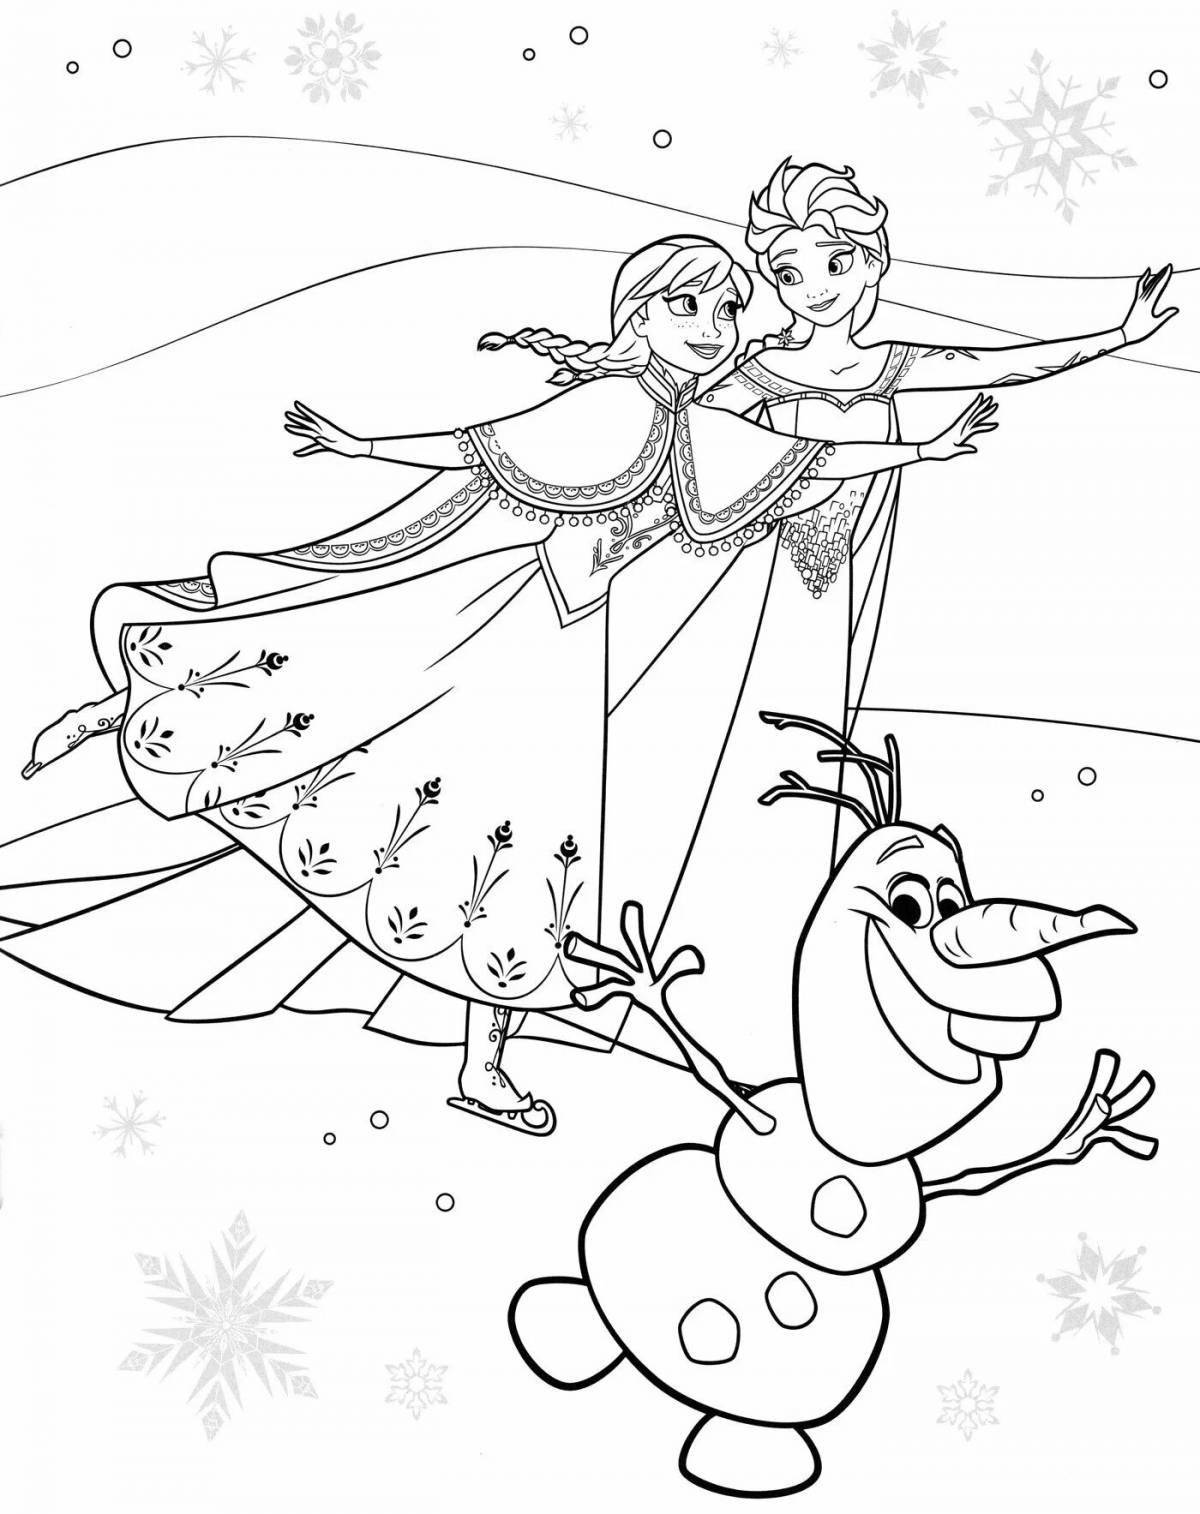 Frozen 2 enchanting coloring book for girls